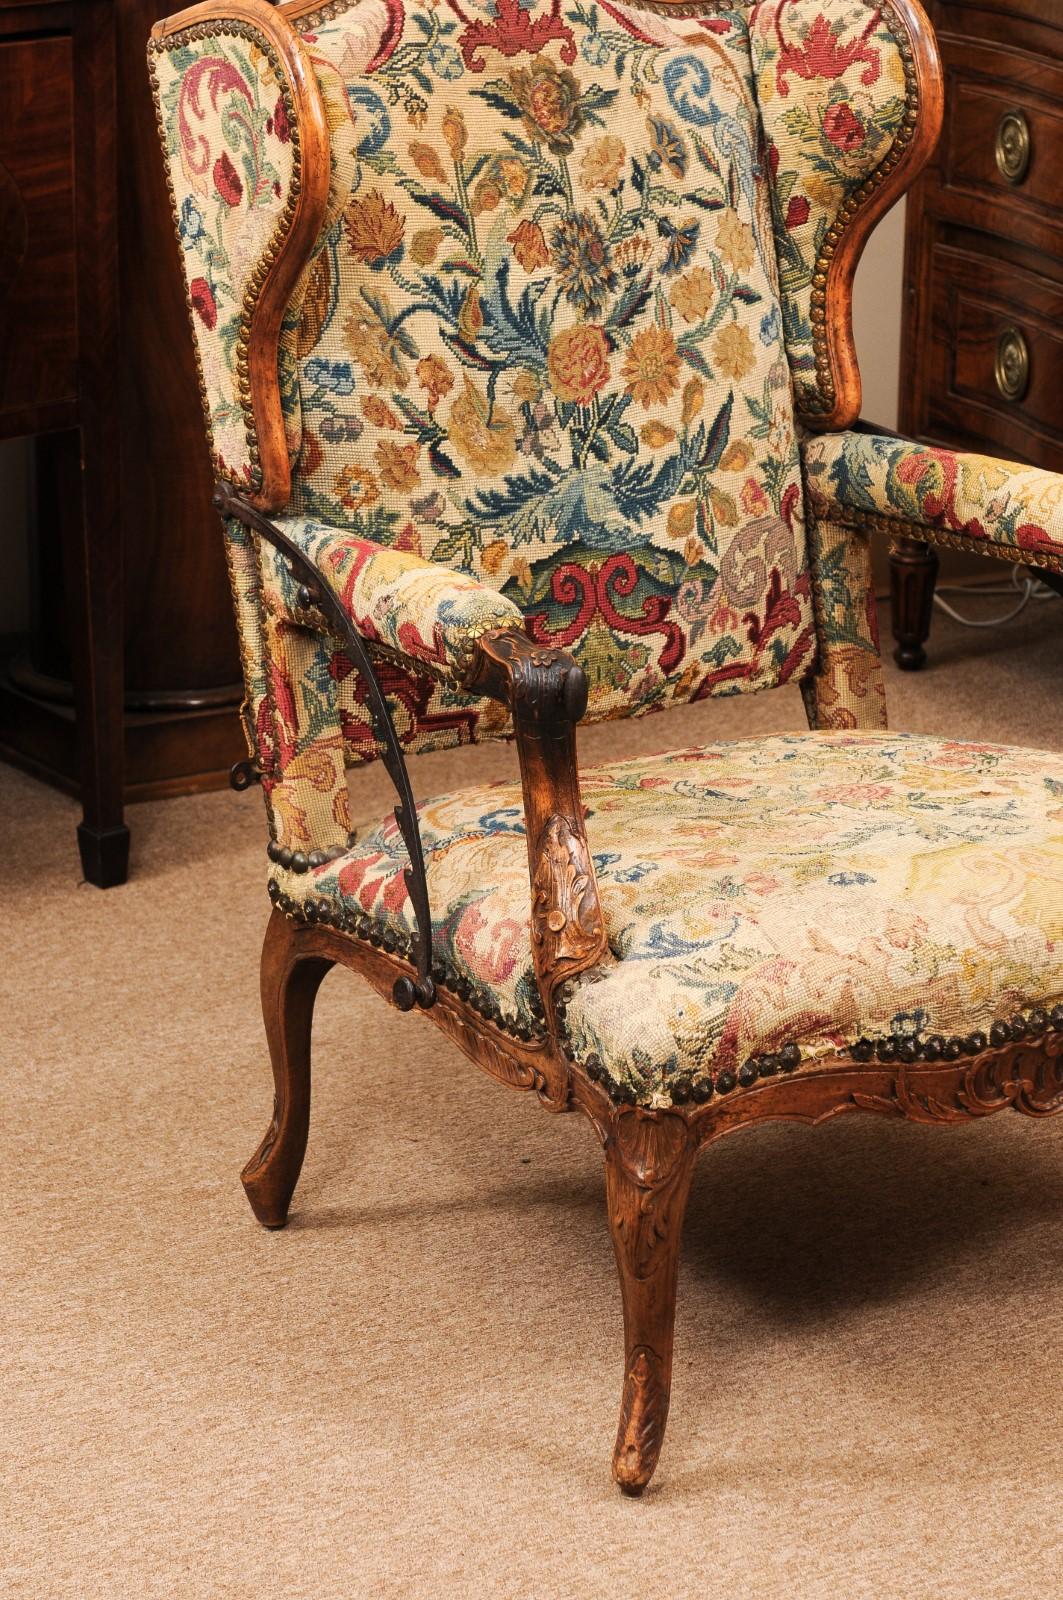 Regency Early 18th Century French Regence Period Walnut Ratchet Wing Chair with Needlewo For Sale